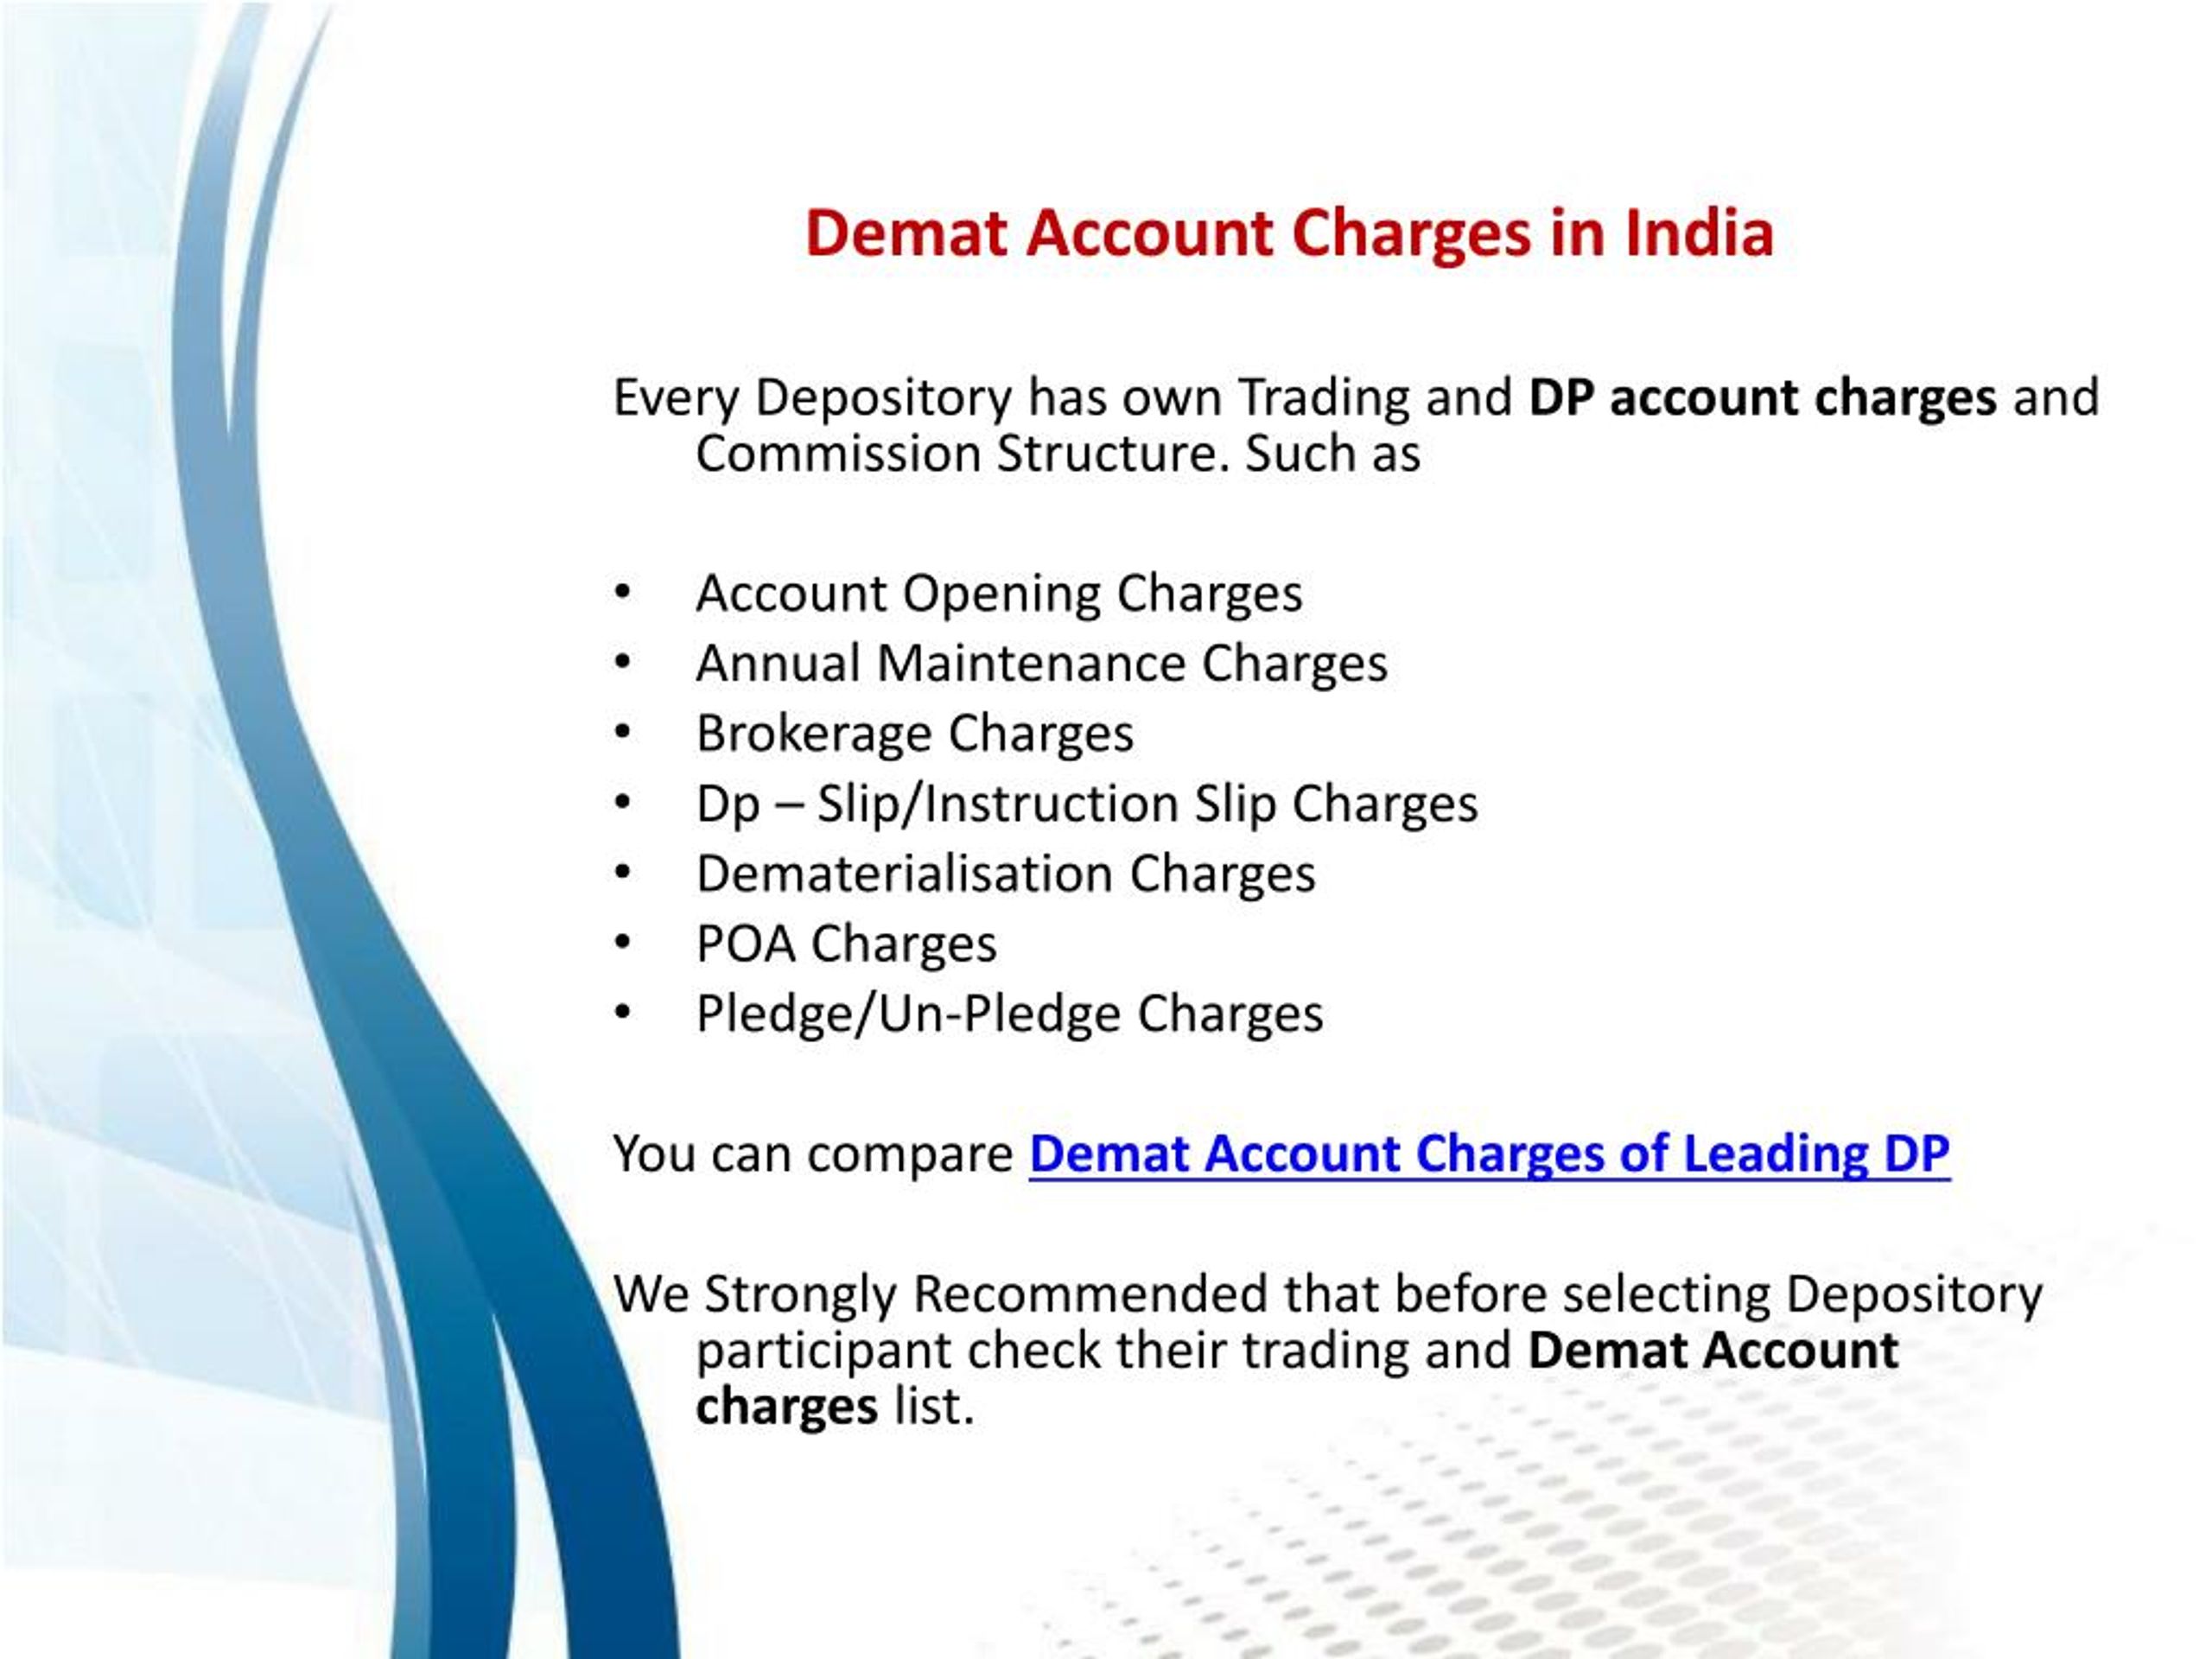 Ppt What Are The Charges For Opening Demat Account Powerpoint Presentation Id7938939 4591